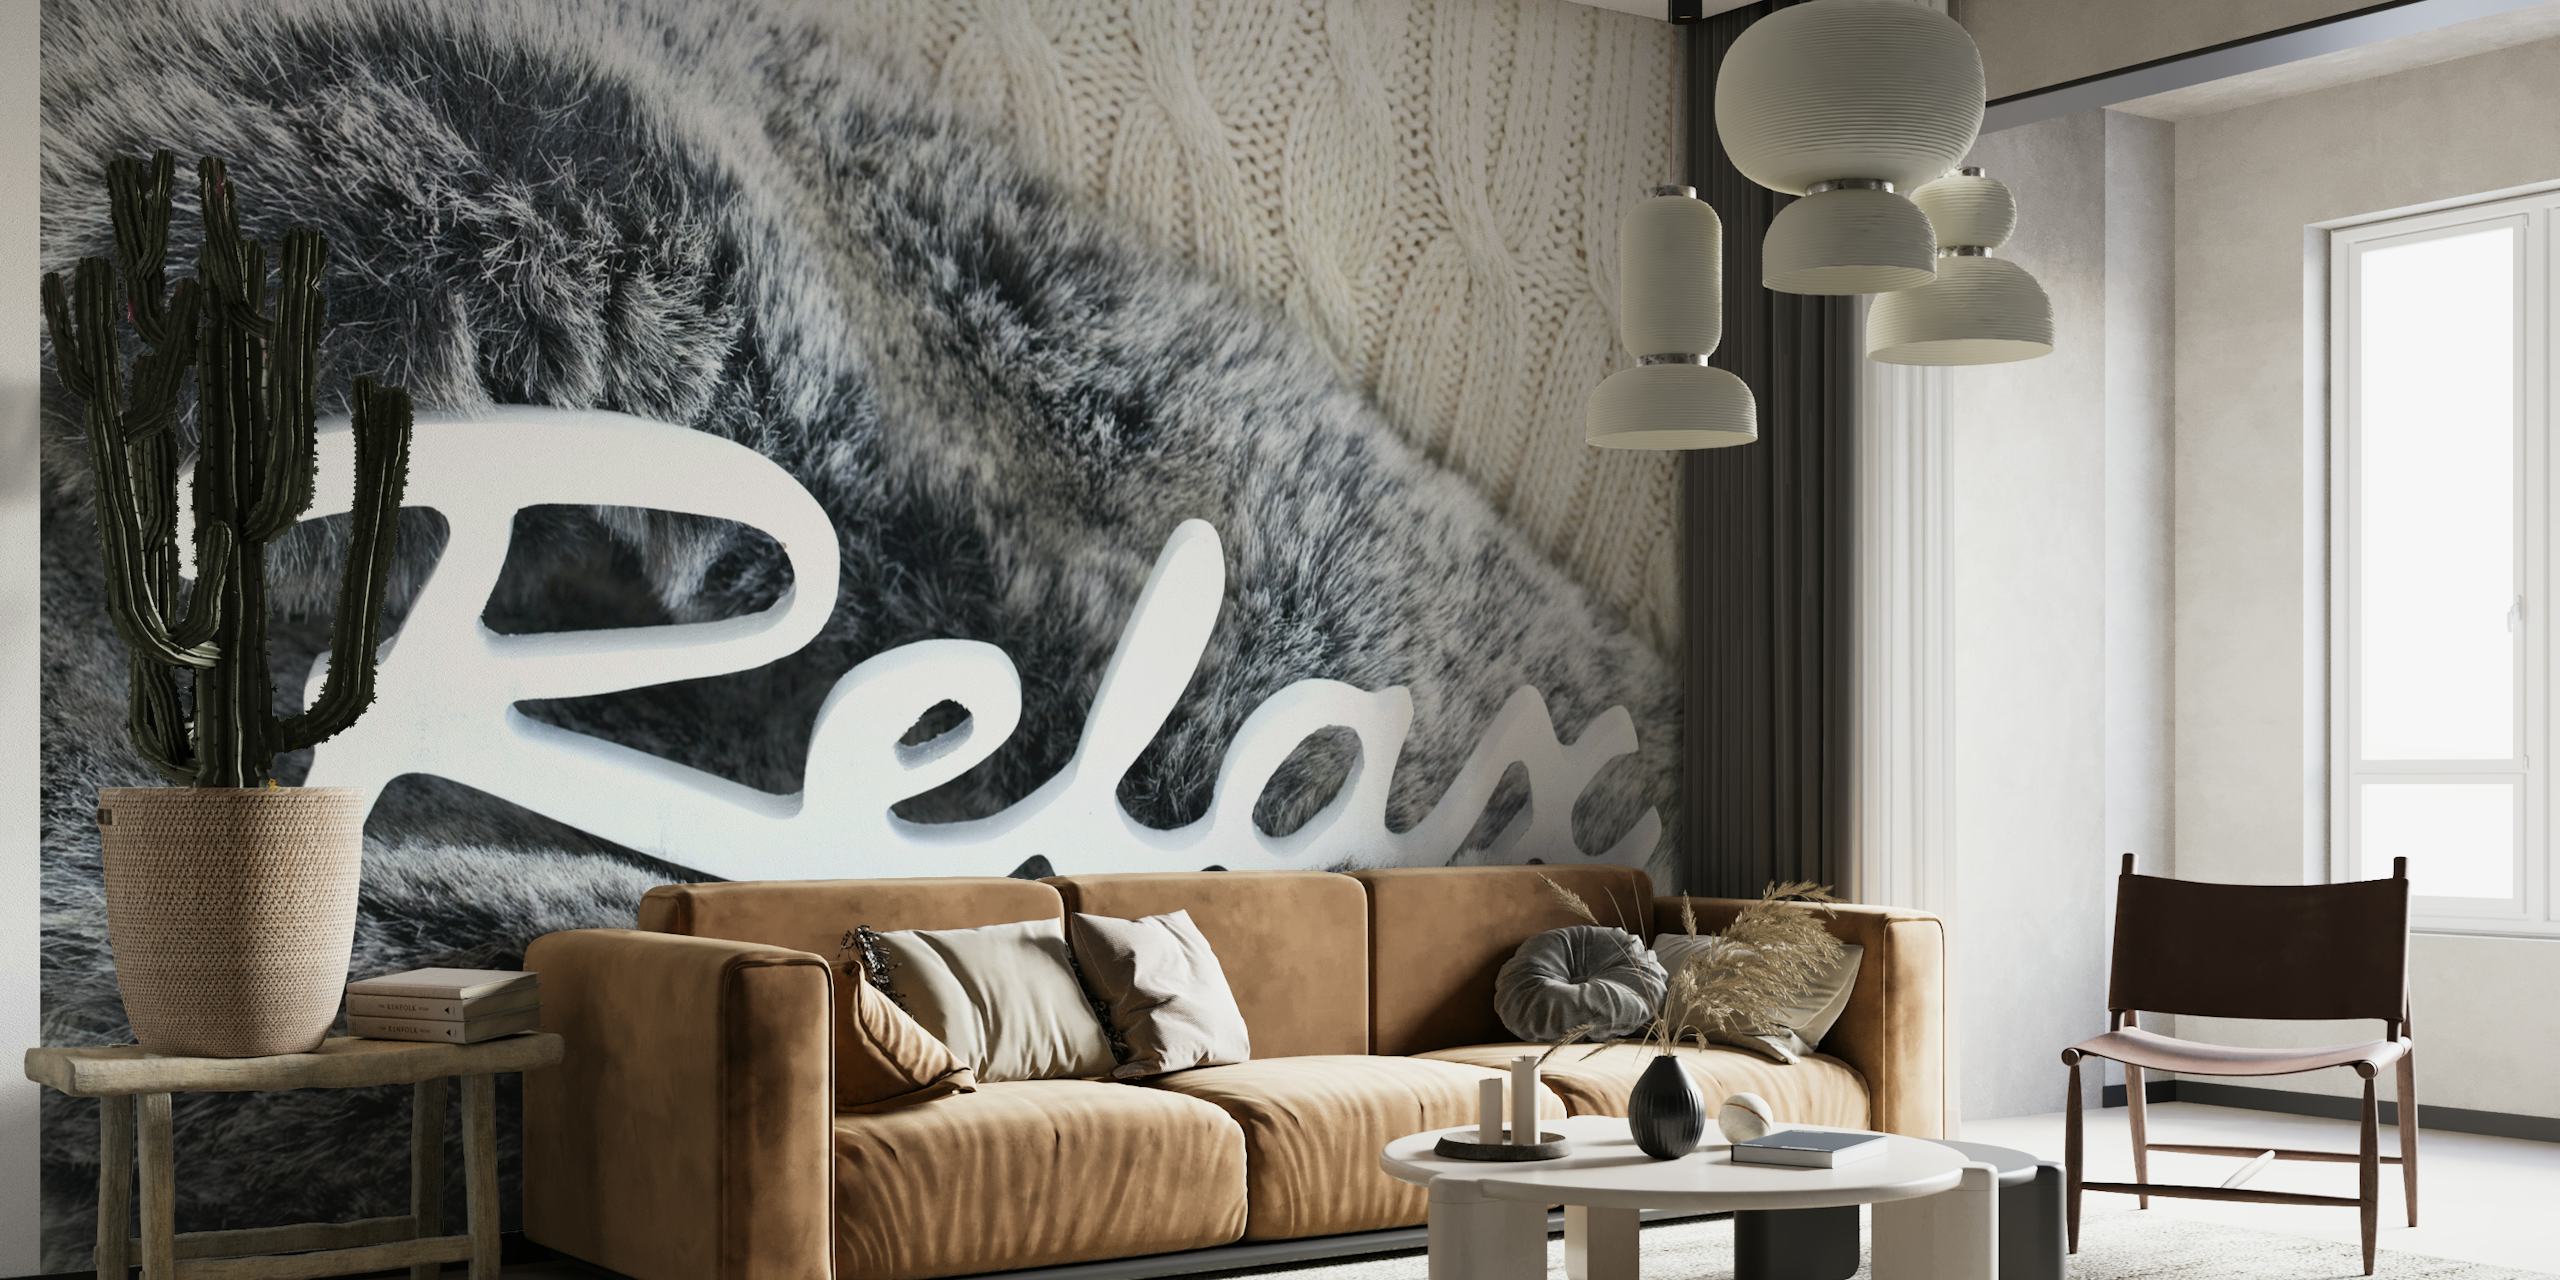 Wall mural with simulated fur texture and the word 'Relax' in stylish script